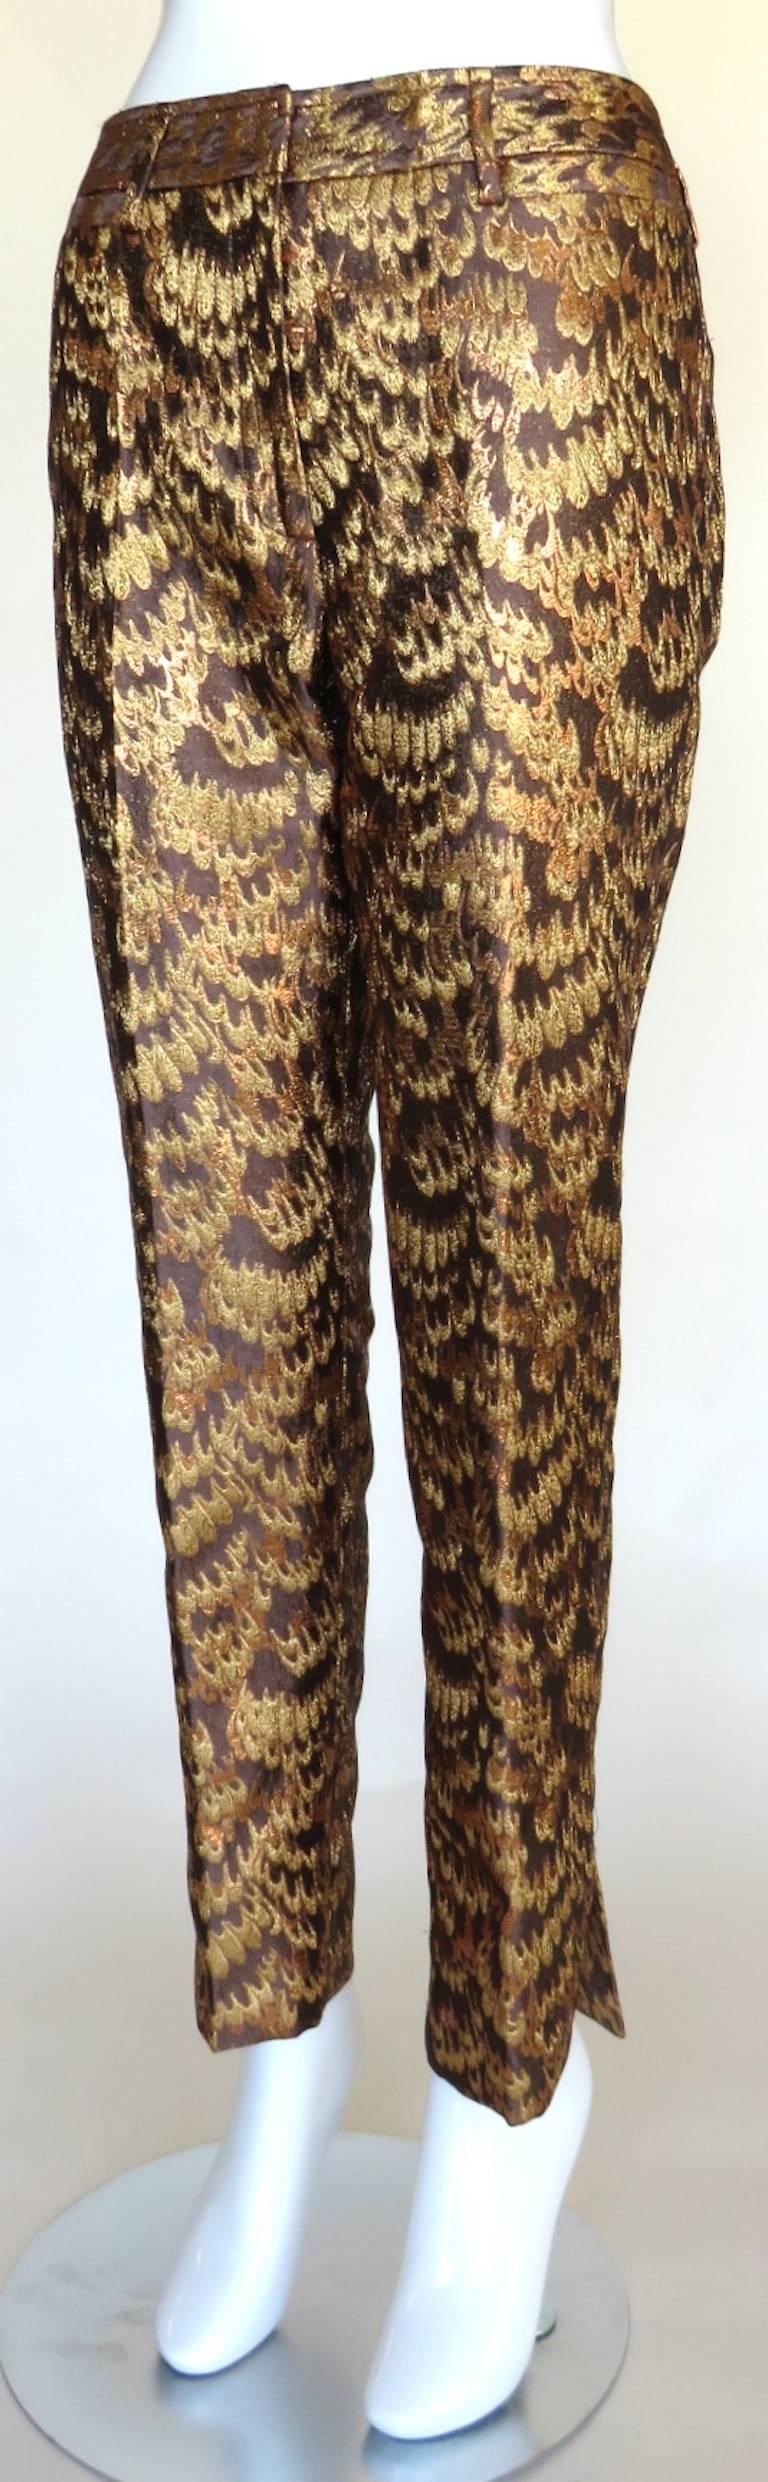 Worn once, excellent condition, DOLCE & GABBANA, metallic, golden brocade feather jacquard pants.

Ultra-lux fabrication featuring woven, feather artwork jacquard.

Tapered leg, flat front style with side slit openings at bottom